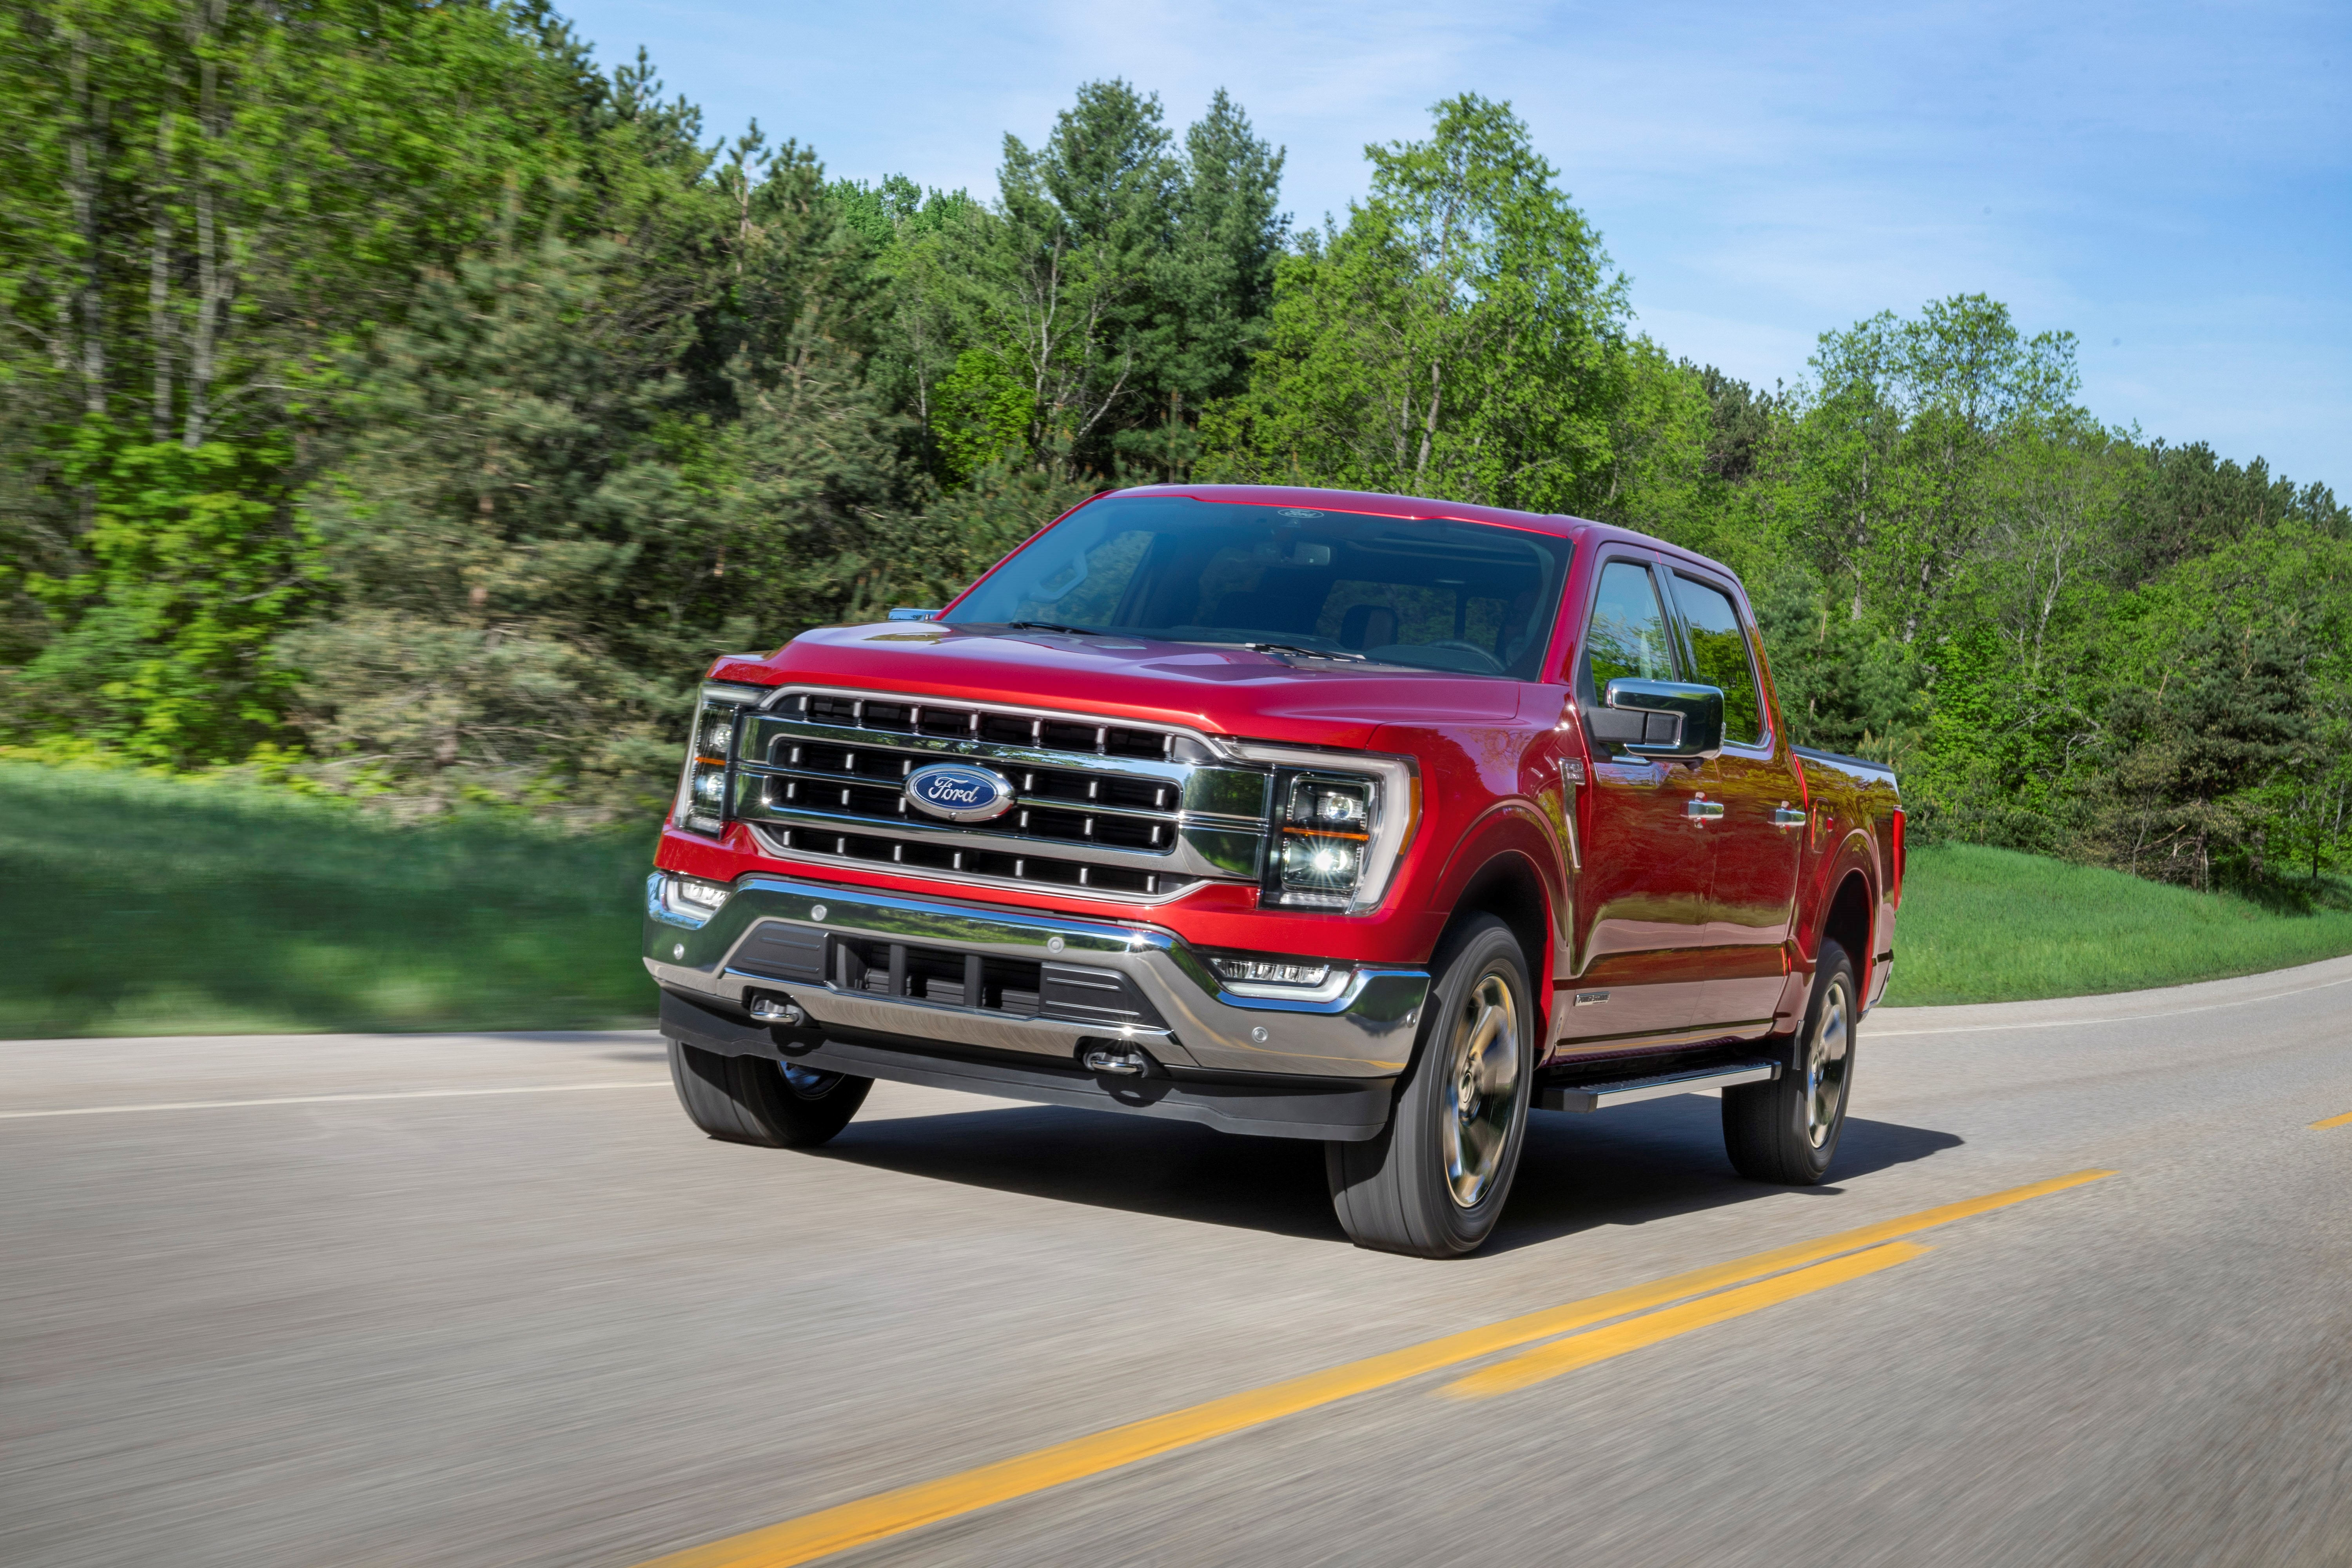 New King Of The Road 2021 Ford F 150 Arrives Motorweek